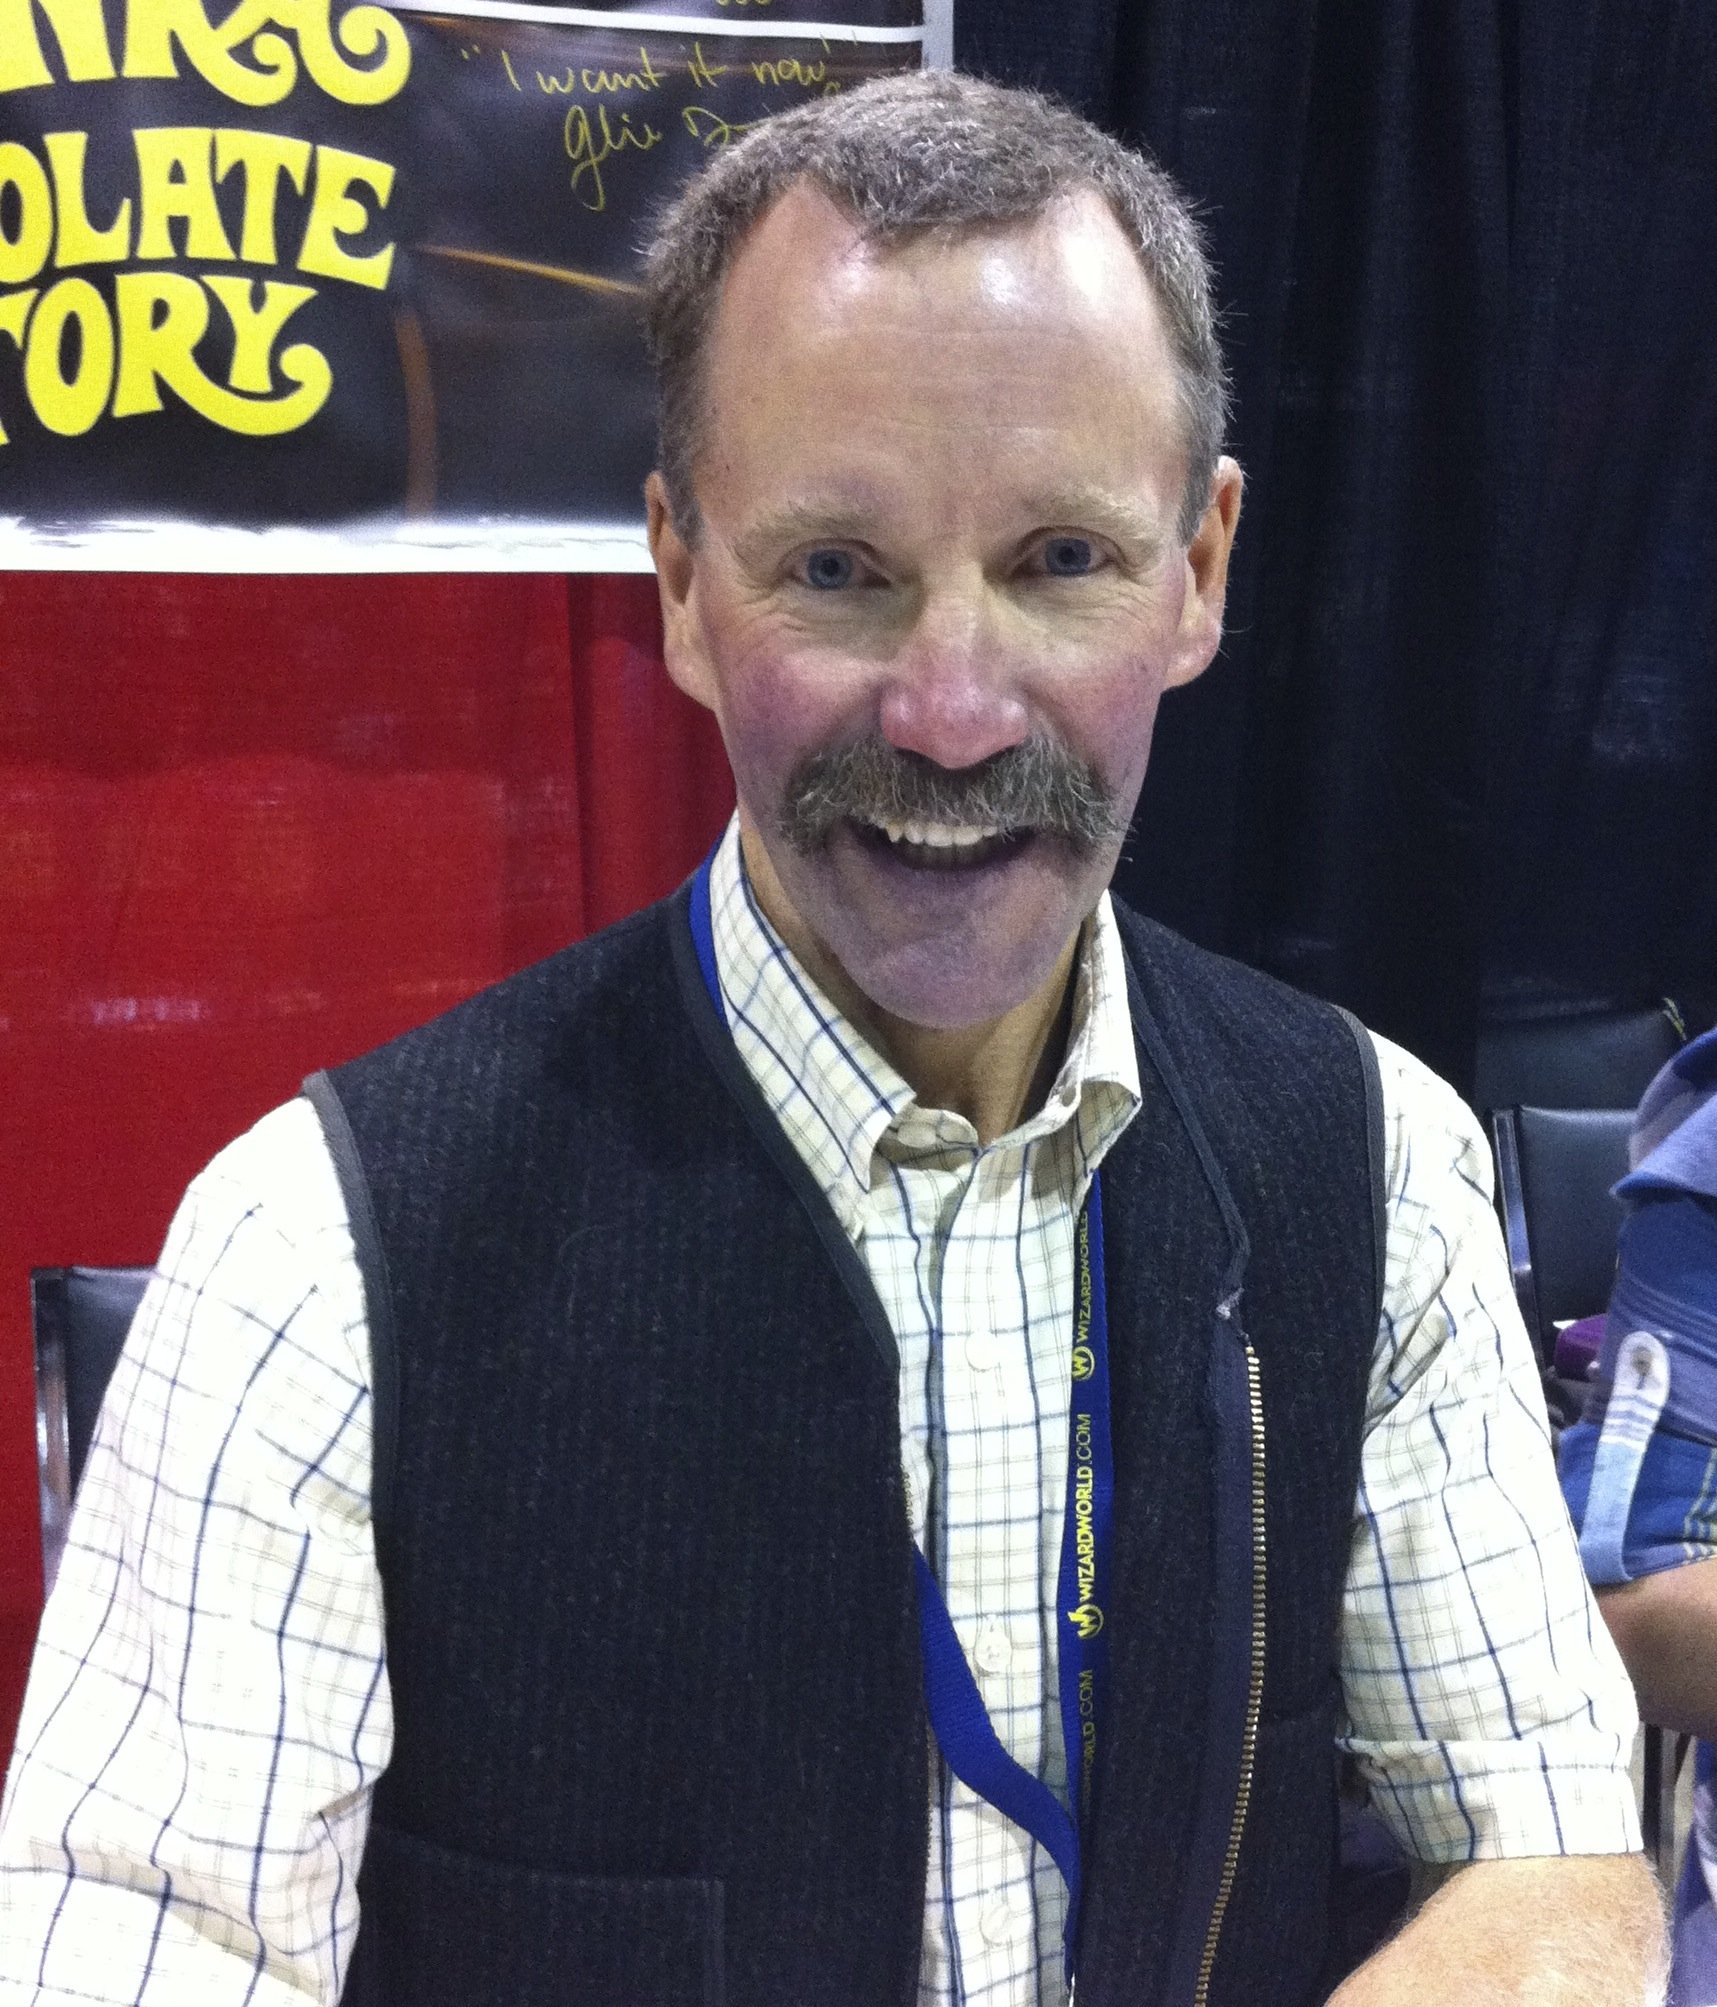 Peter Ostrum at the 2011 Wizard World Chicago event; the child cast of Willy Wonka & the Chocolate Factory were promoting that film's 40th anniversary.| Wikimedia Commons